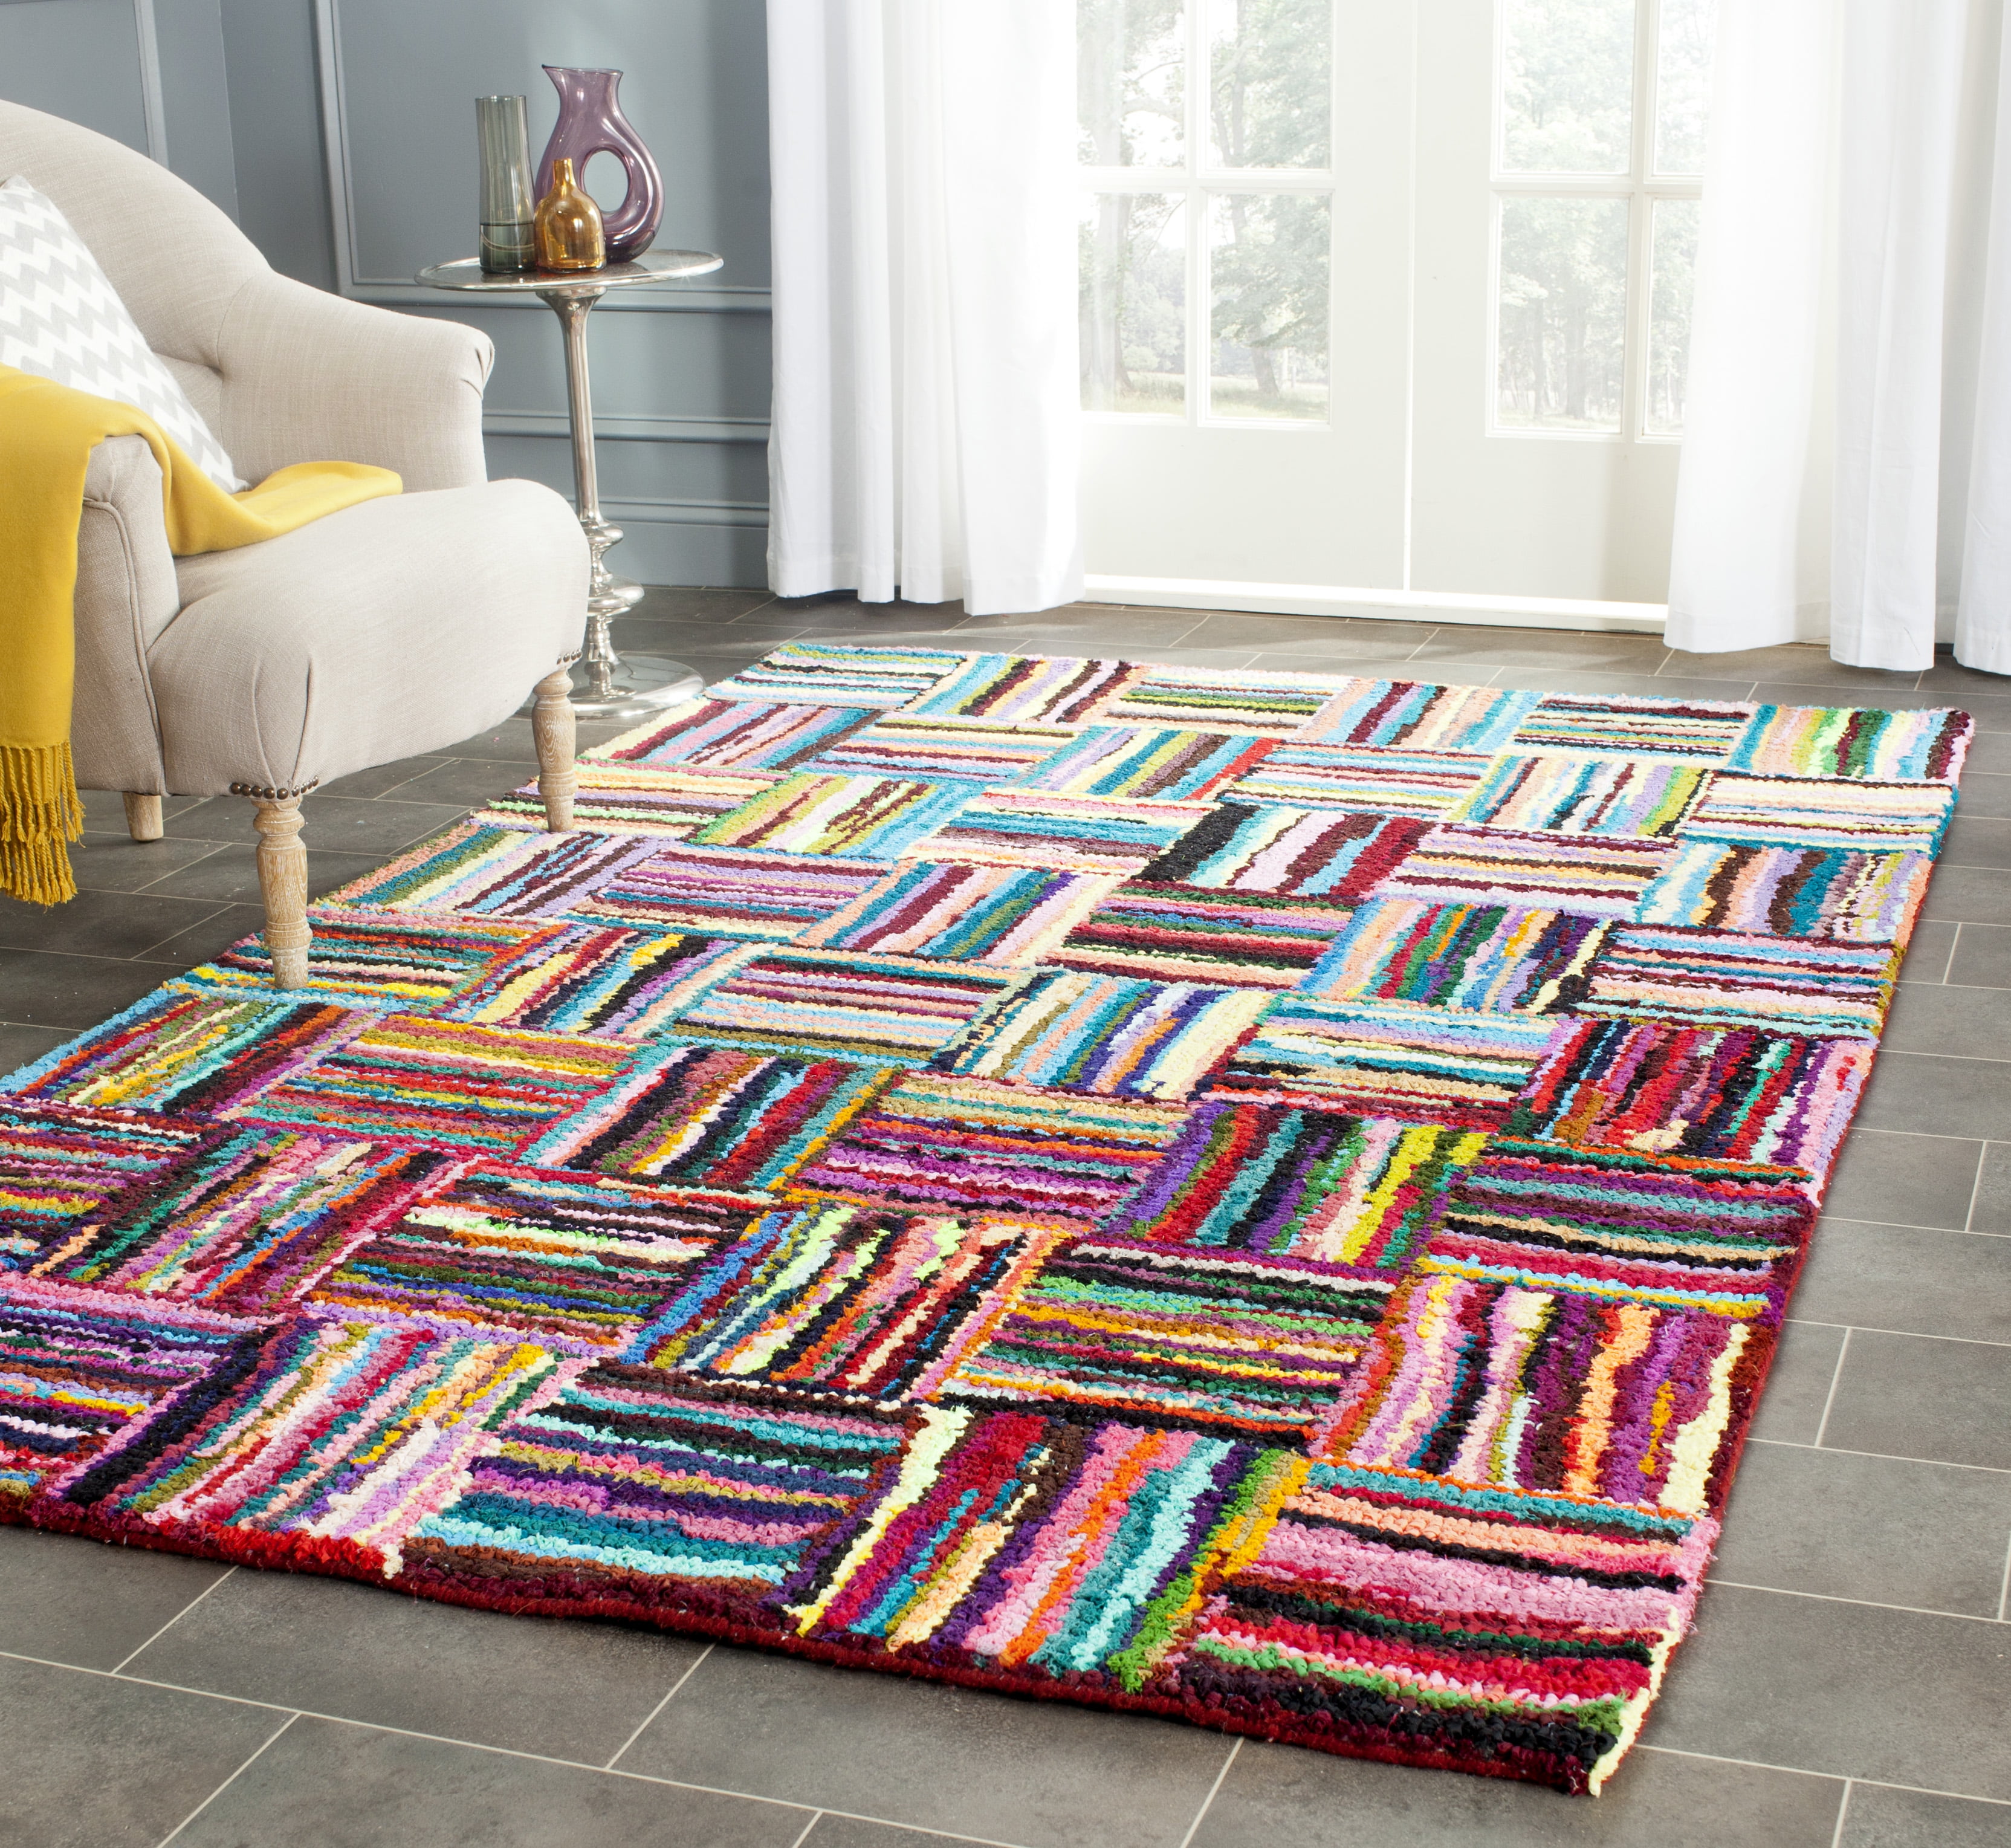 Details about   Indian handmade colorful pure cotton chindi rug home decor floor carpet rugs